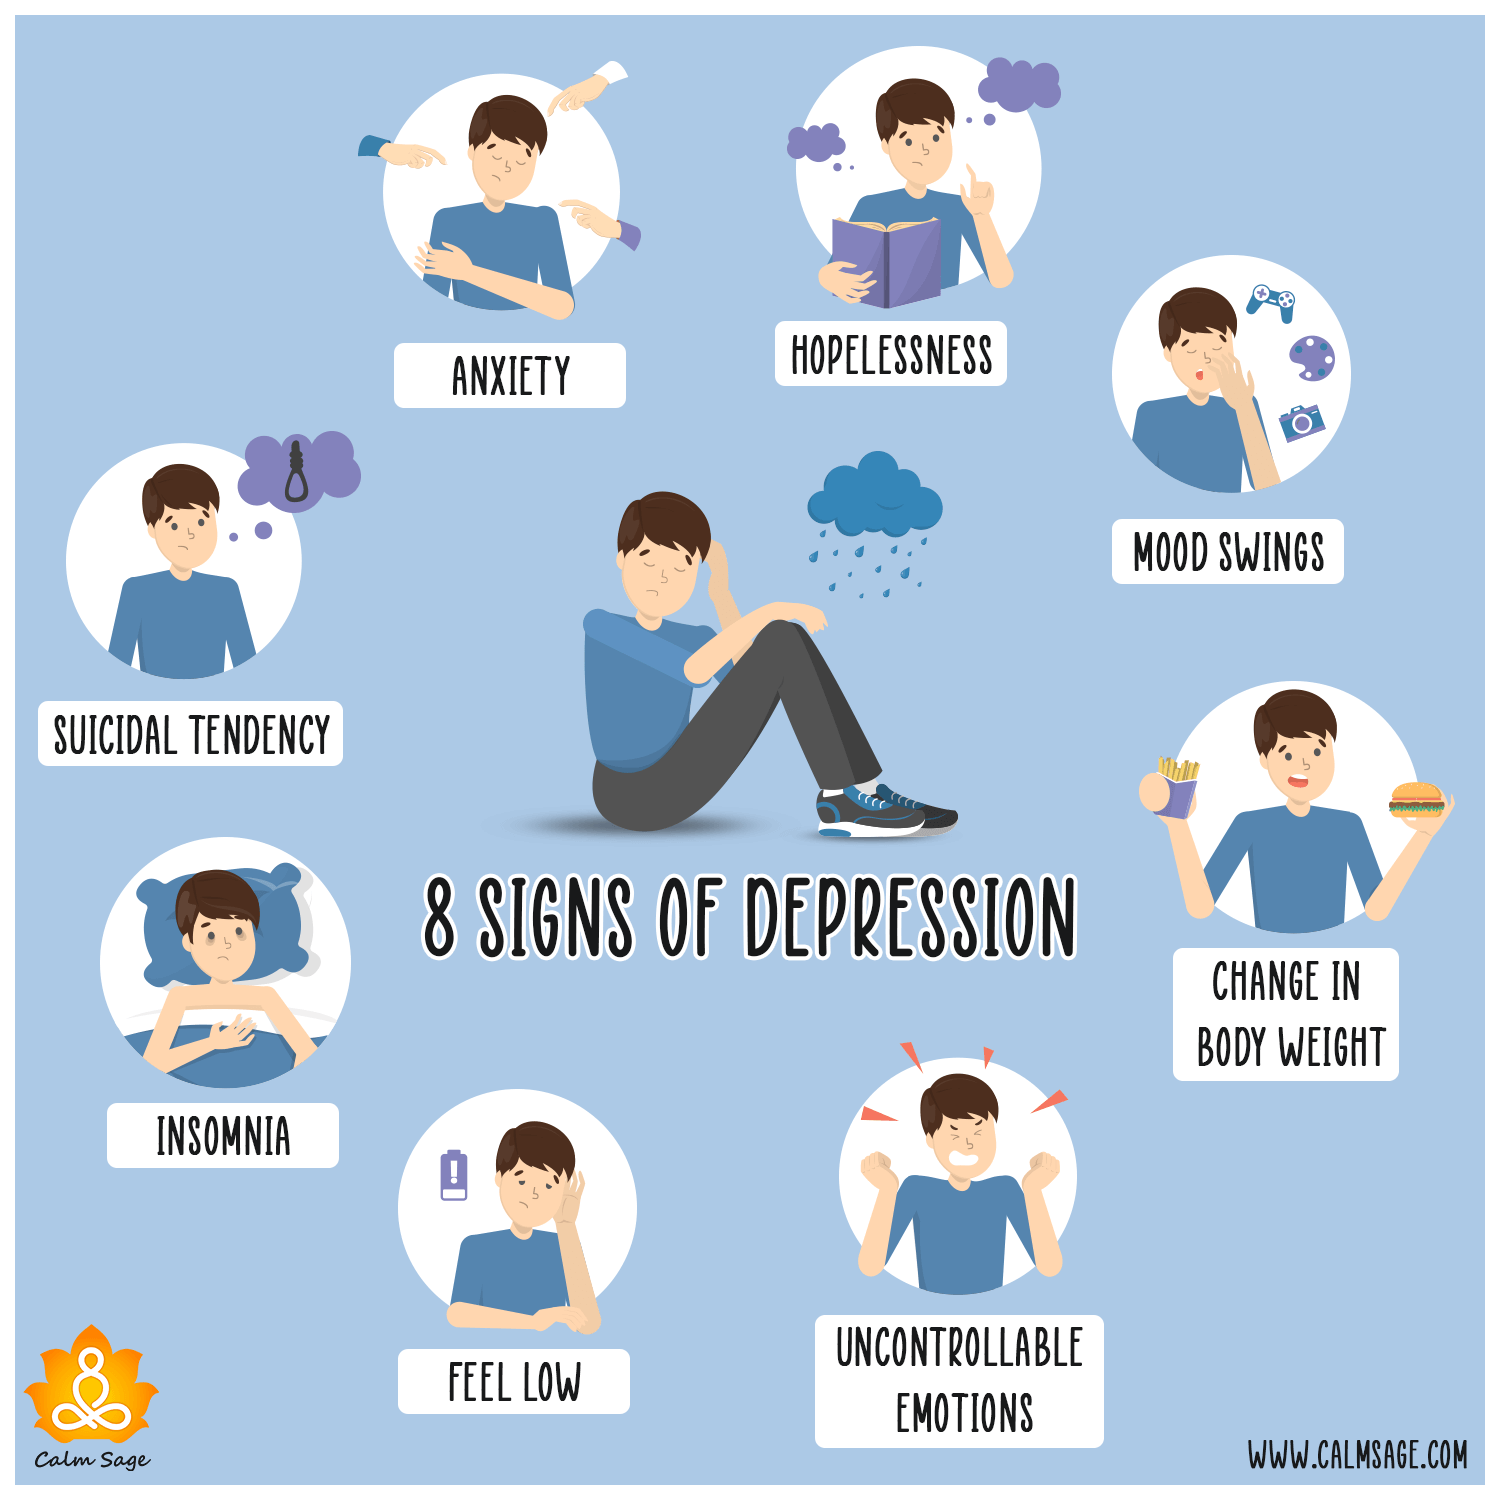 Signs of depression and anxiety